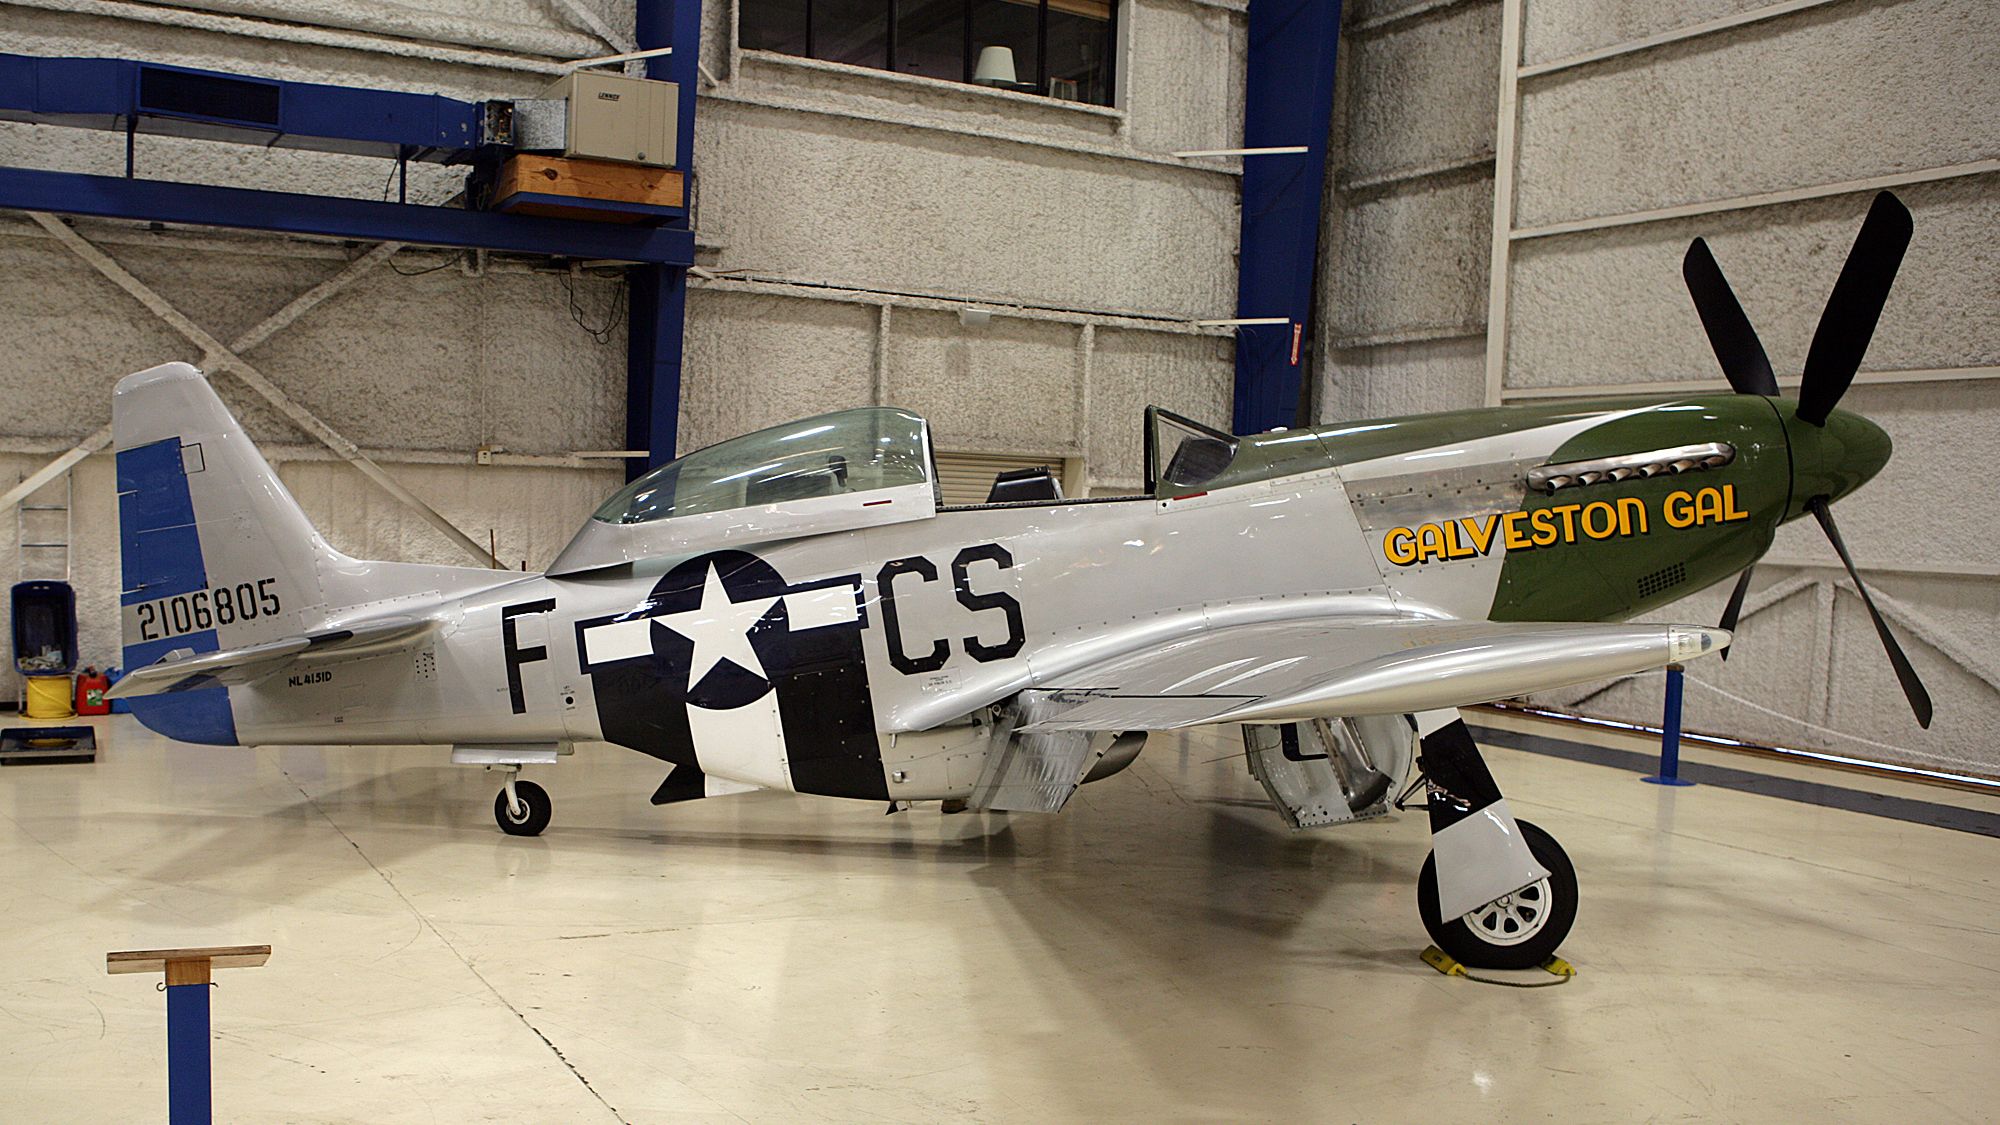 Two people killed in crash of vintage P-51 Mustang aircraft